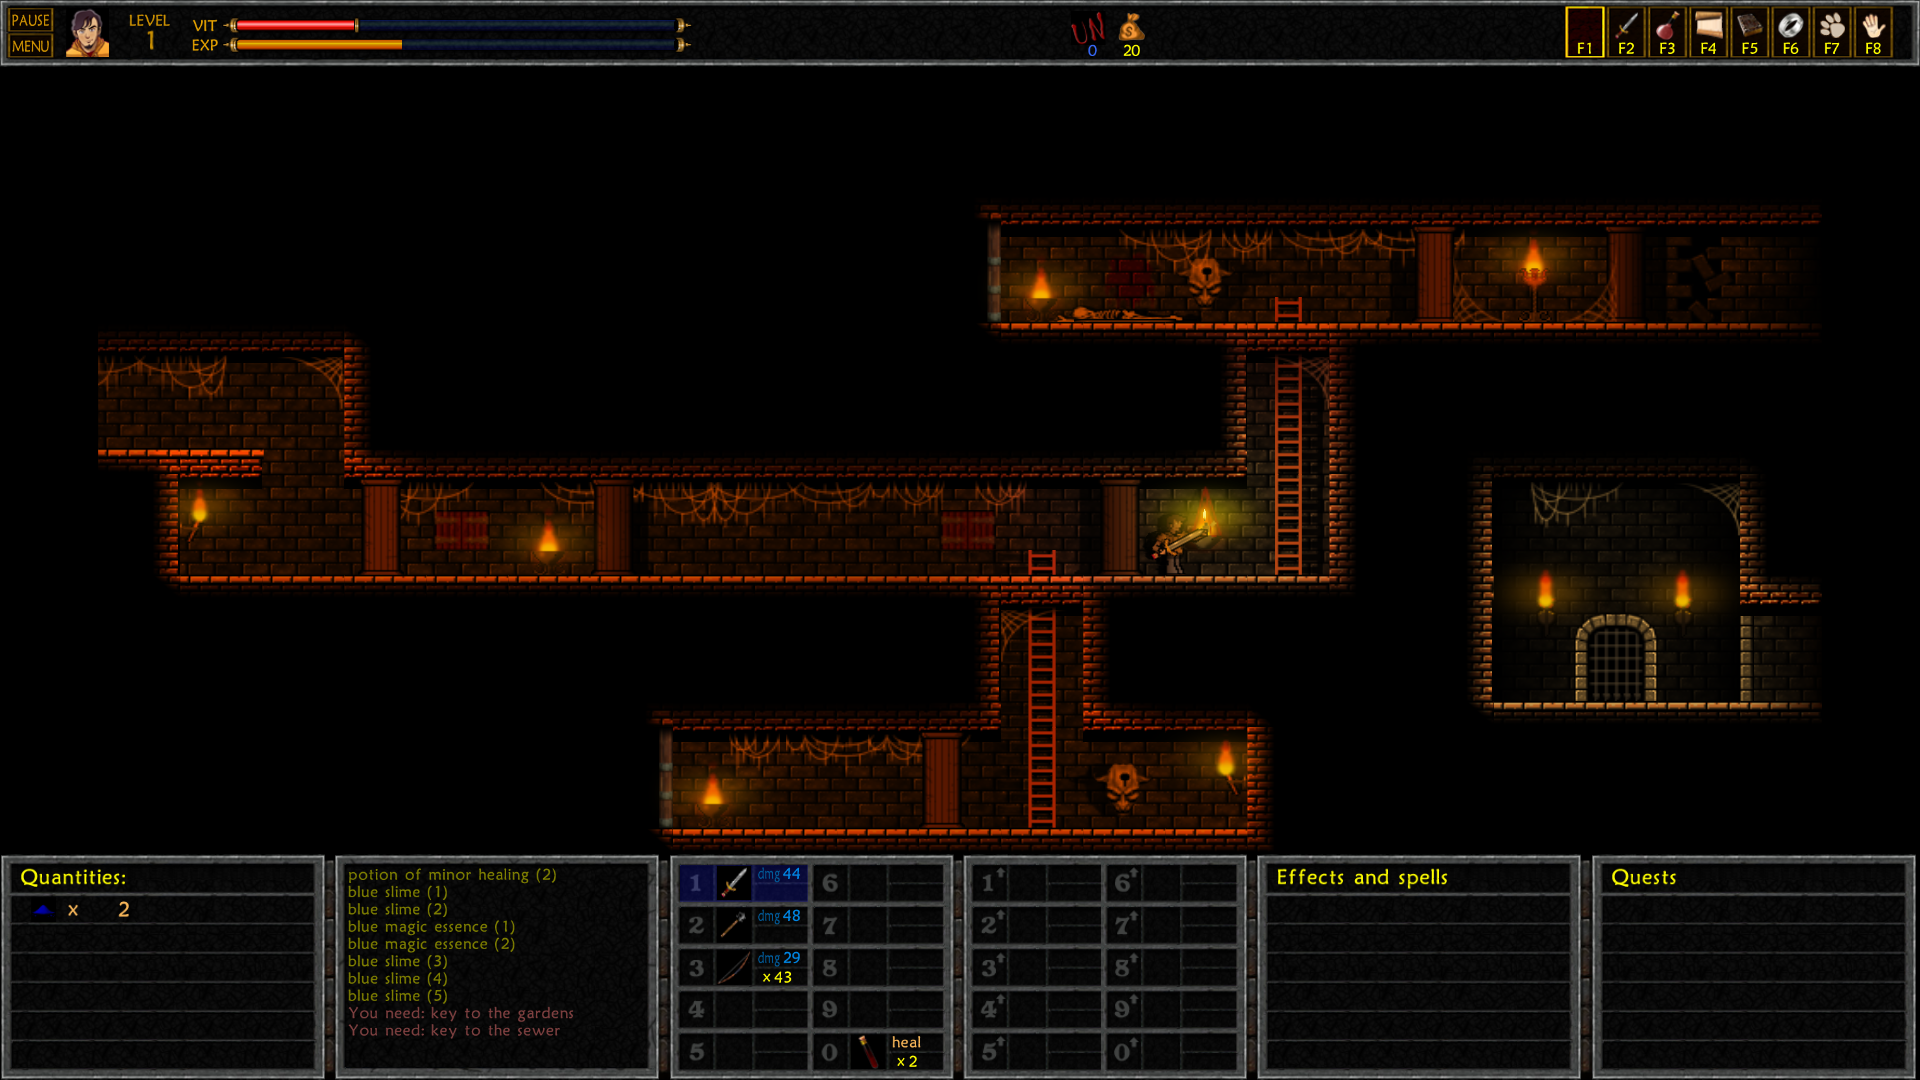 Figure 16 - This dungeon crawler has beautiful graphics and lighting effects